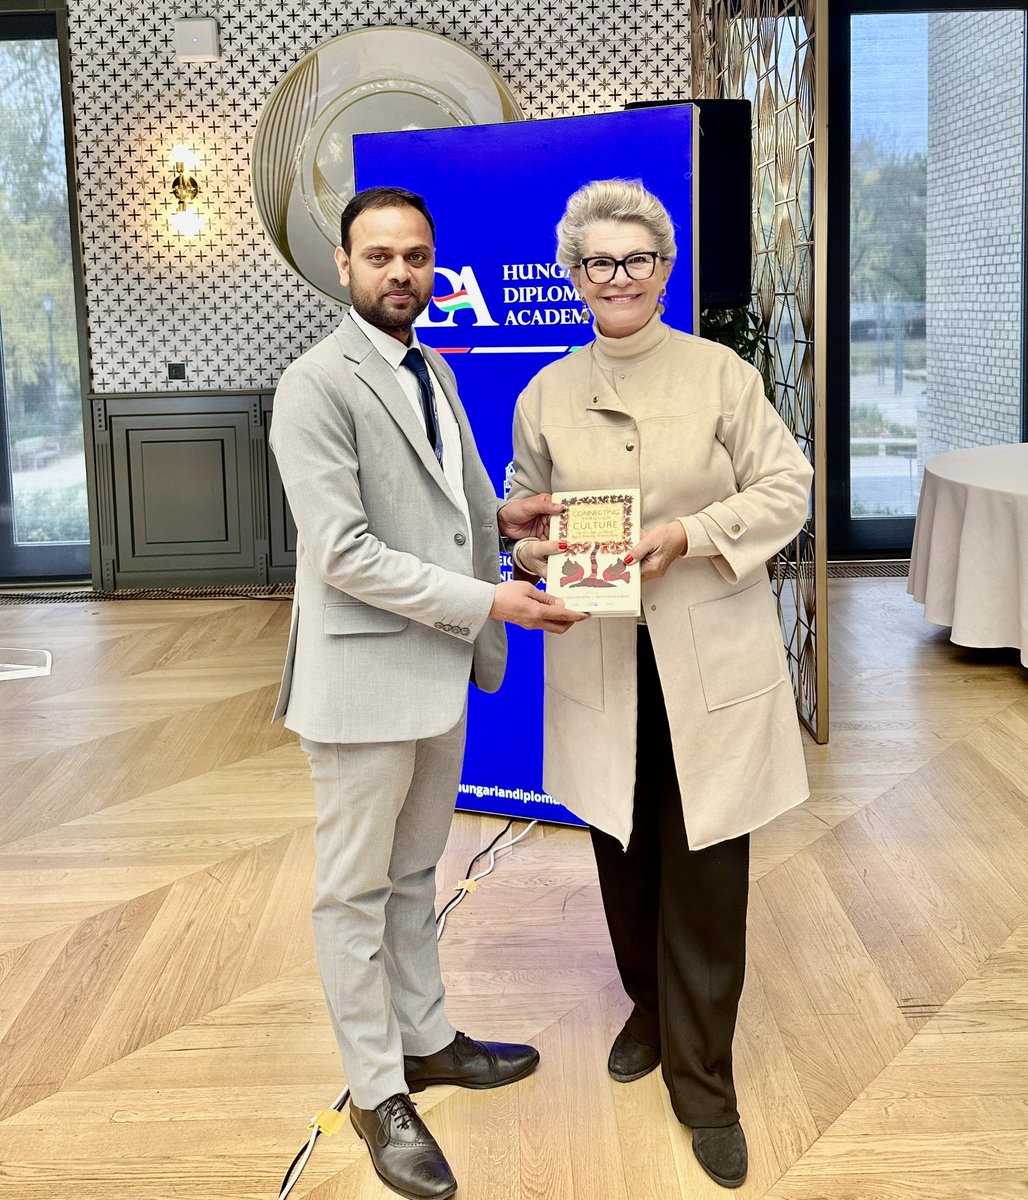 Delighted to have met Ambassador @KatalinBogyay, President of the United Nations Association of Hungary, former President of 36th Session of @UNESCO General Conference (2011–2013) & founder of #Women4Diplomacy movement.

Presented her “Connecting Through Culture” book

@iccr_hq